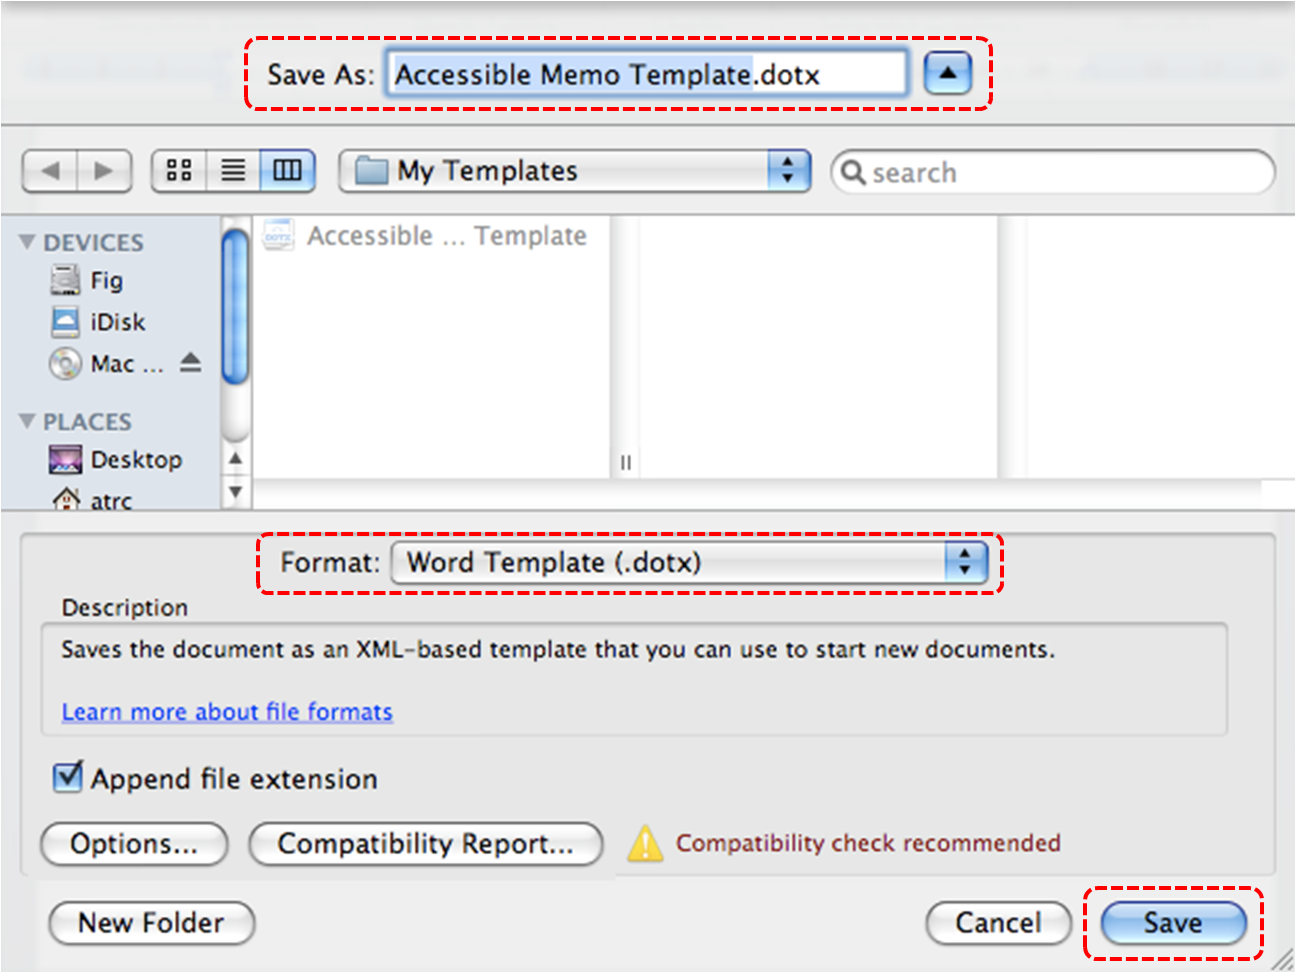 Image demonstrates location of Save As box, Format drop-down list and Save button in Save As dialog.